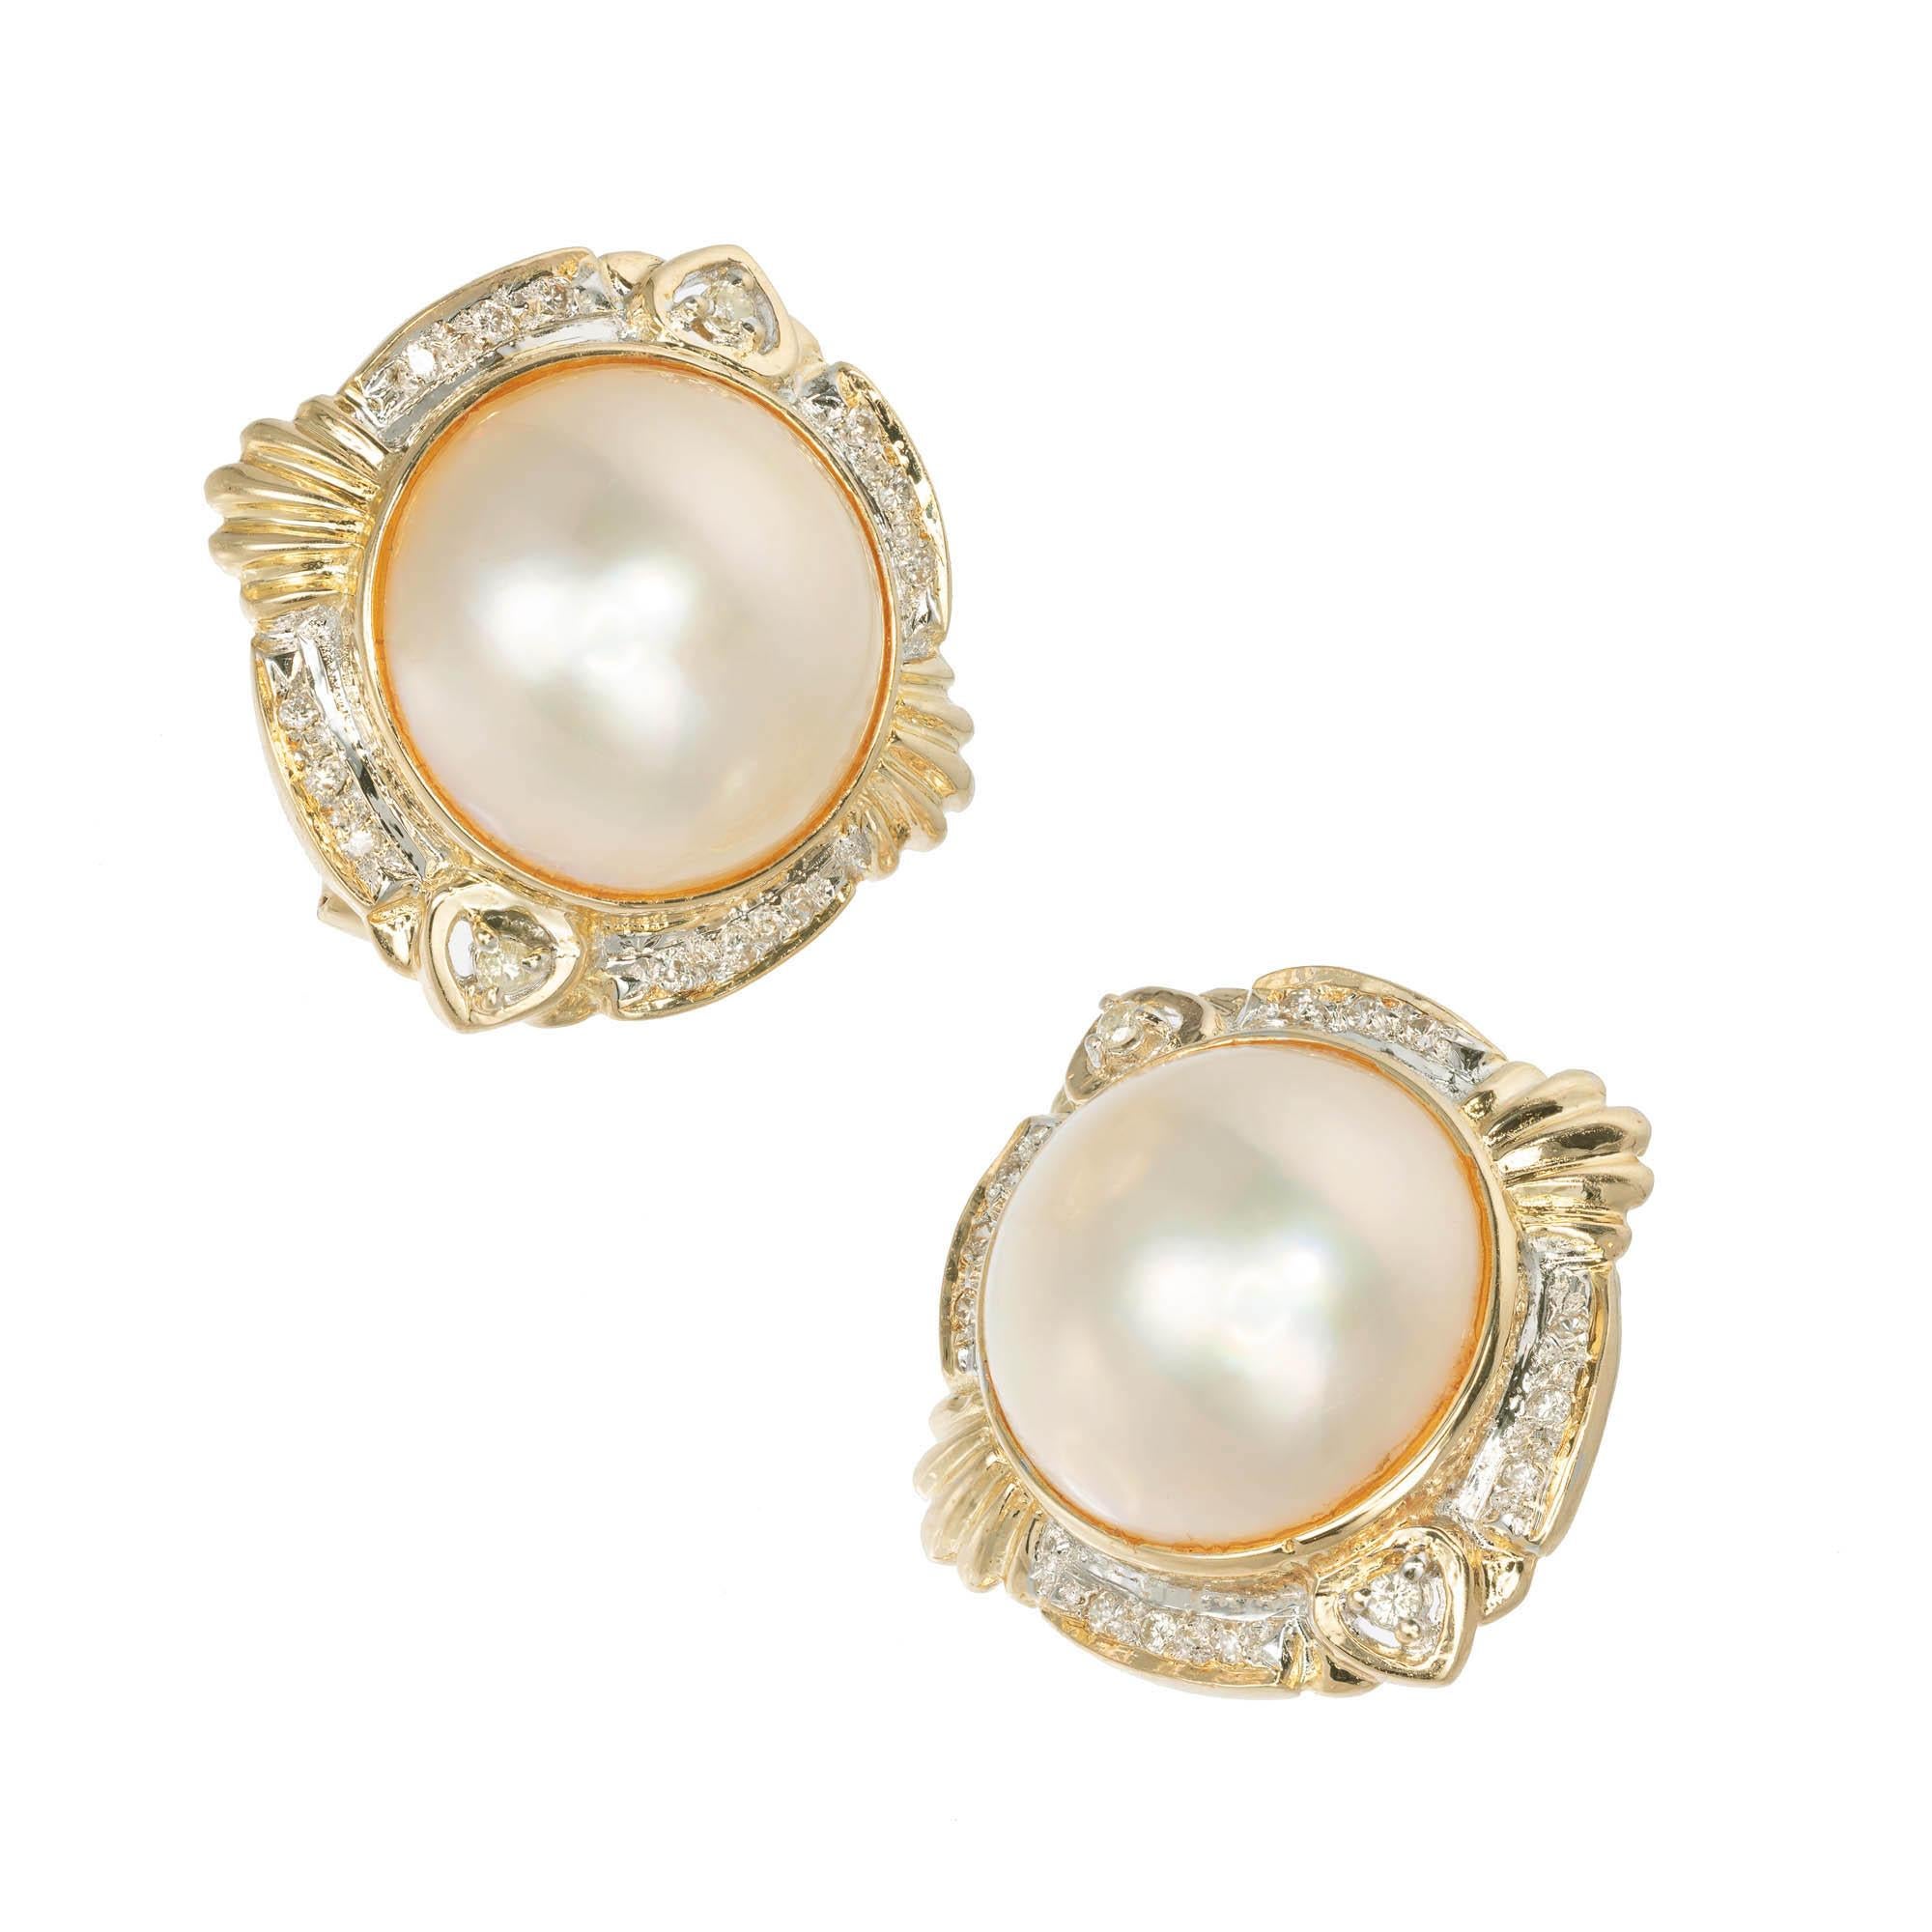 14k Mobe Pearl and Diamond earrings crème colored Mobe Pearl with a rose hue set in 14k yellow gold setting with round Diamonds Pavé set in four parts scalloped edge in two parts with prong set Diamonds in the other 2 parts.

2 Mobe Pearls,